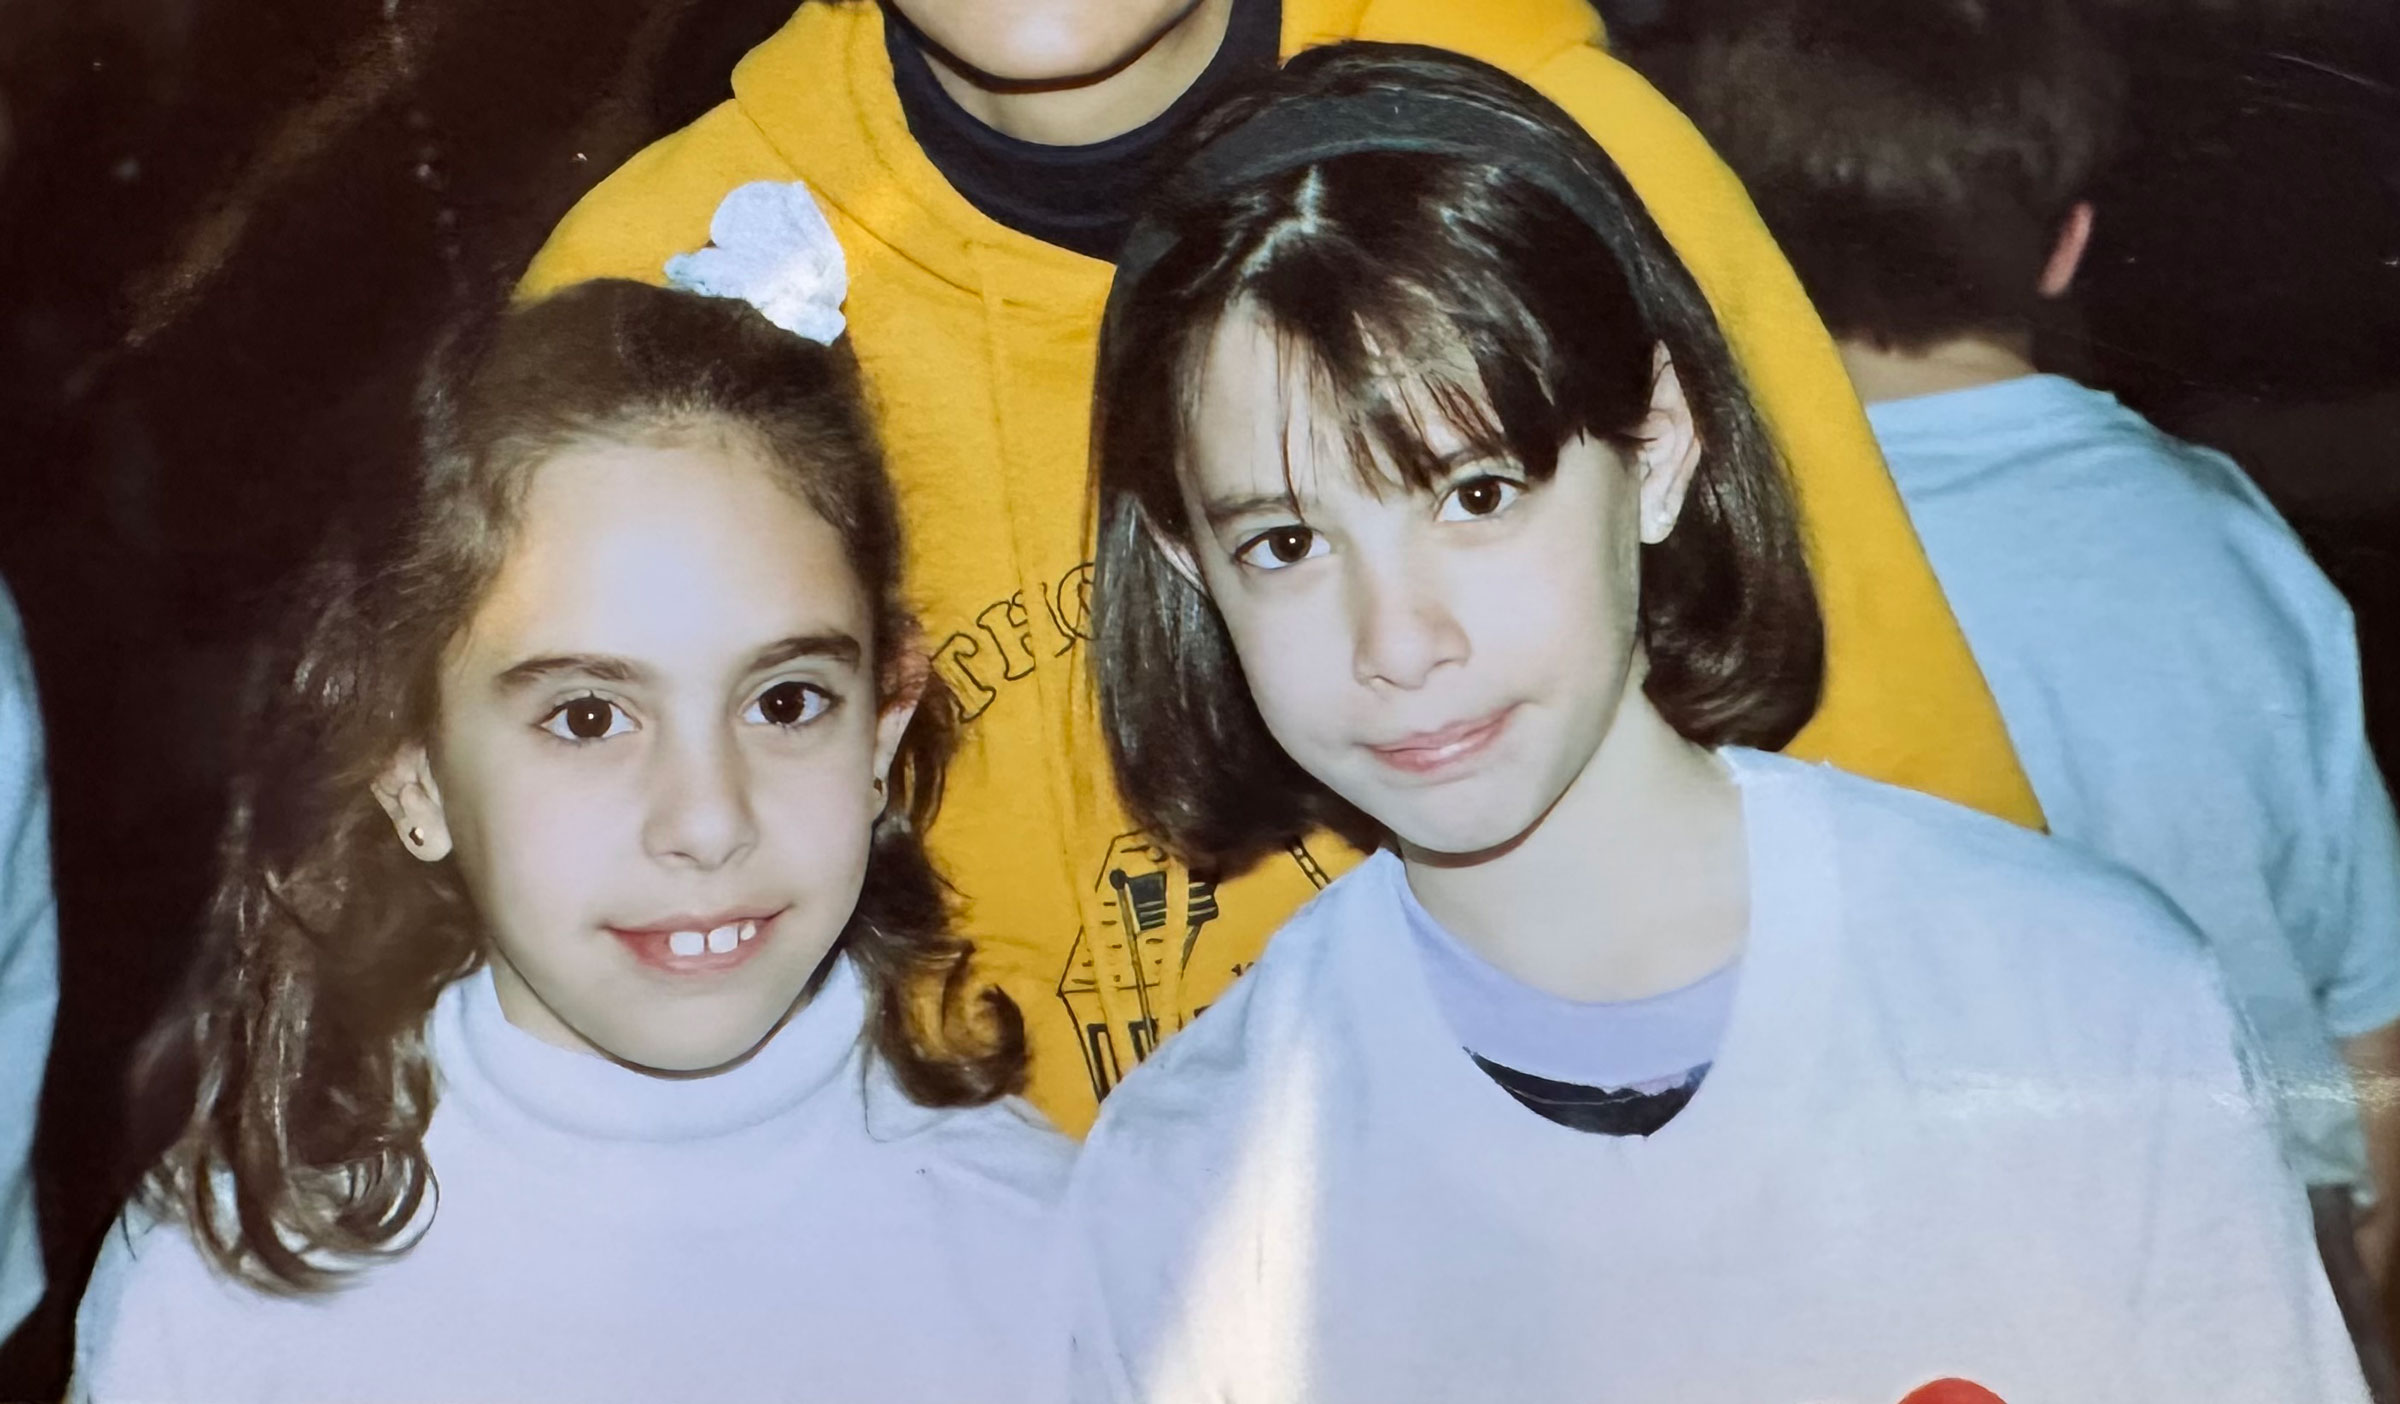 The author and her friend in a childhood photo.